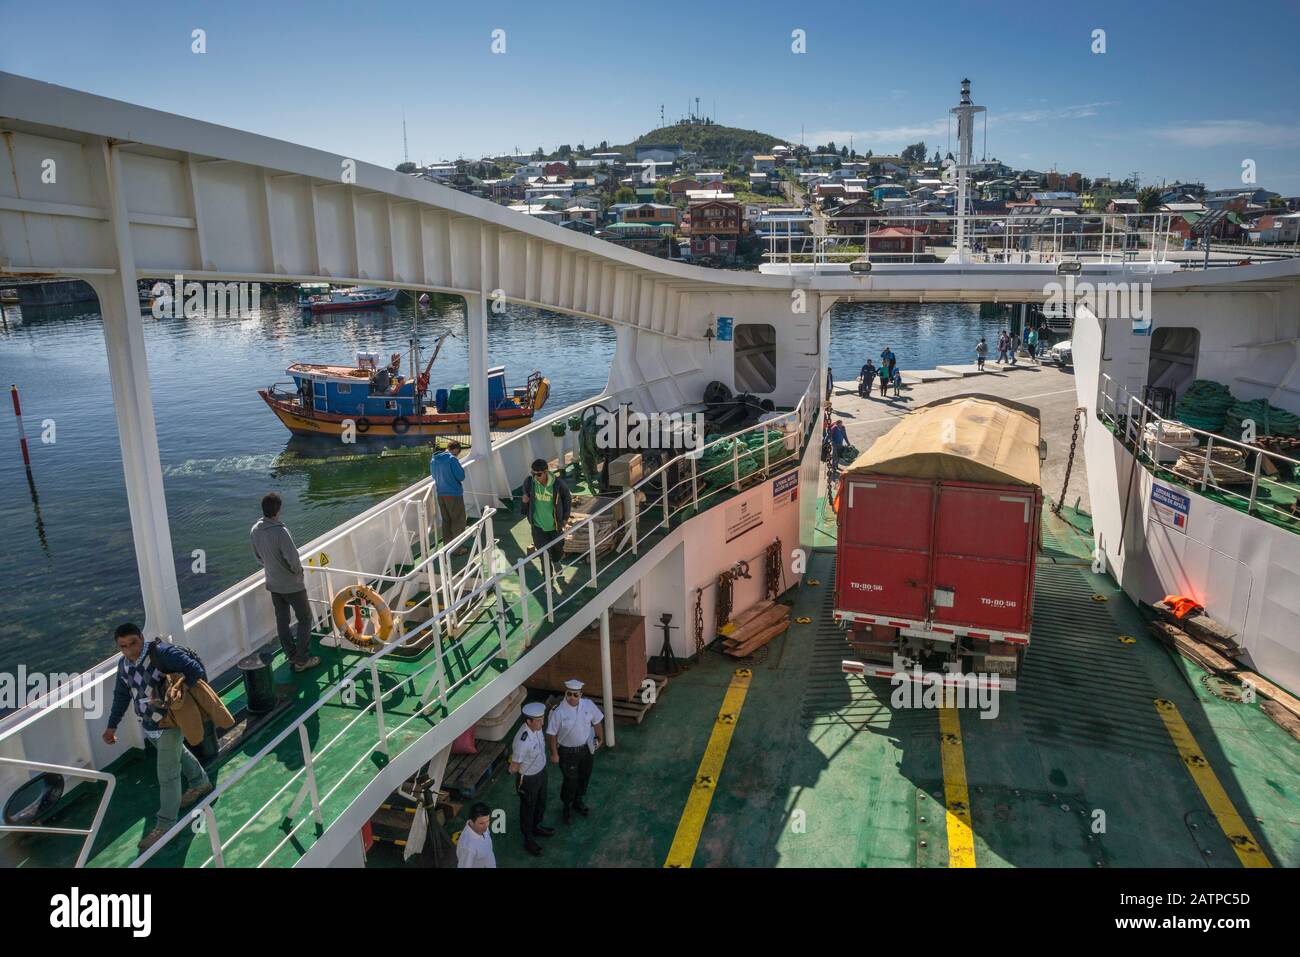 Truck backing up to enter Quelat ferry, docked in port of Melinka at Isla Ascension, Guaitecas Archipelago, Aysen Region, Patagonia, Chile Stock Photo